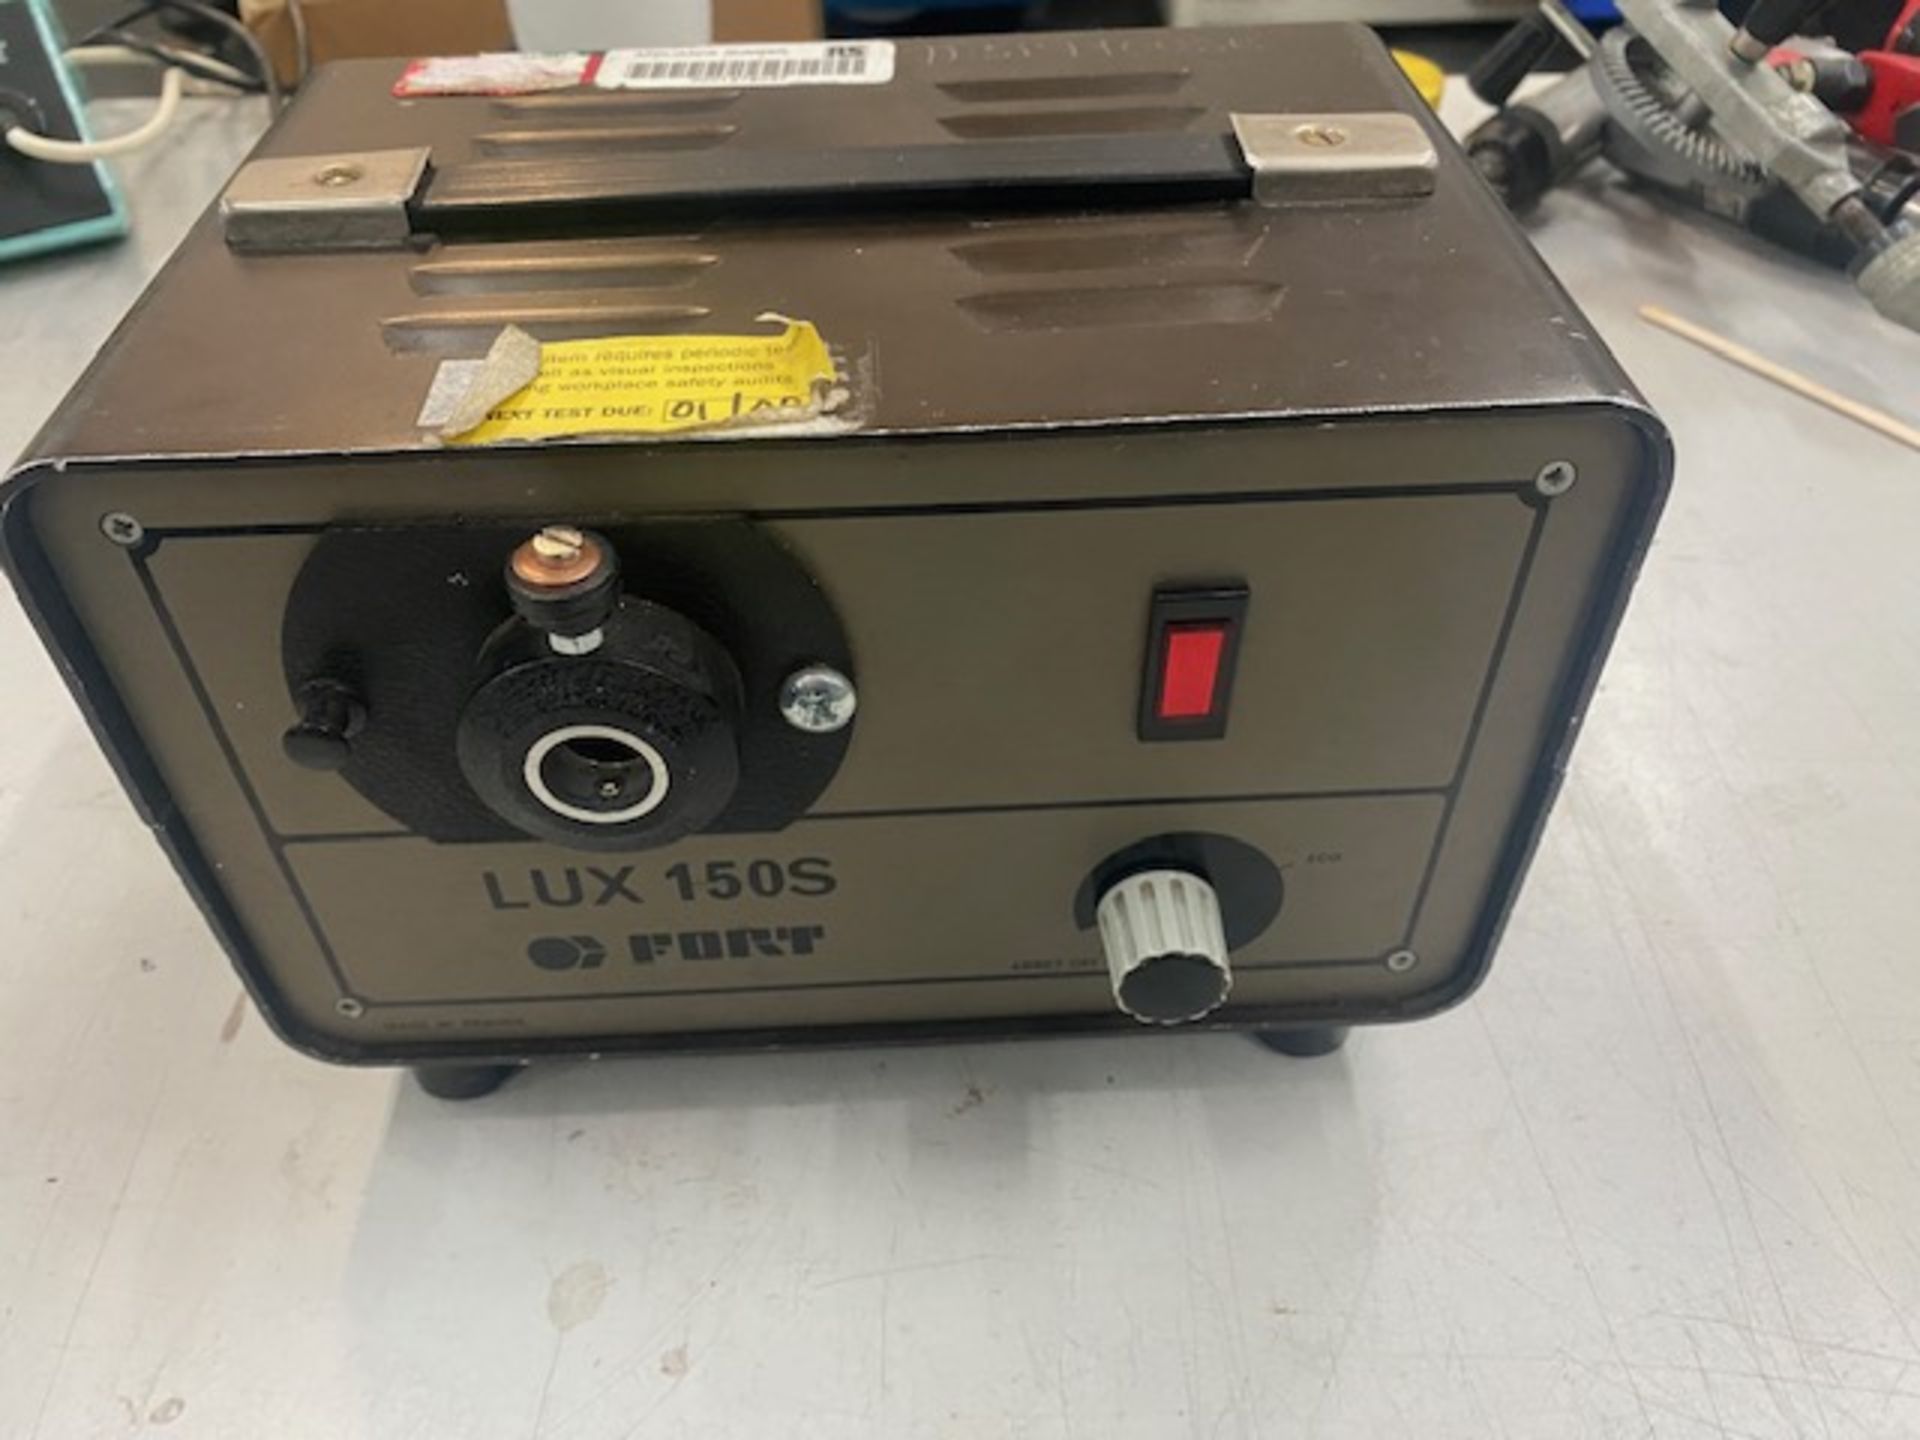 Fort Lux 150s microscope illumination lamp ring light test unit S/N 83122 (Located Upminster)